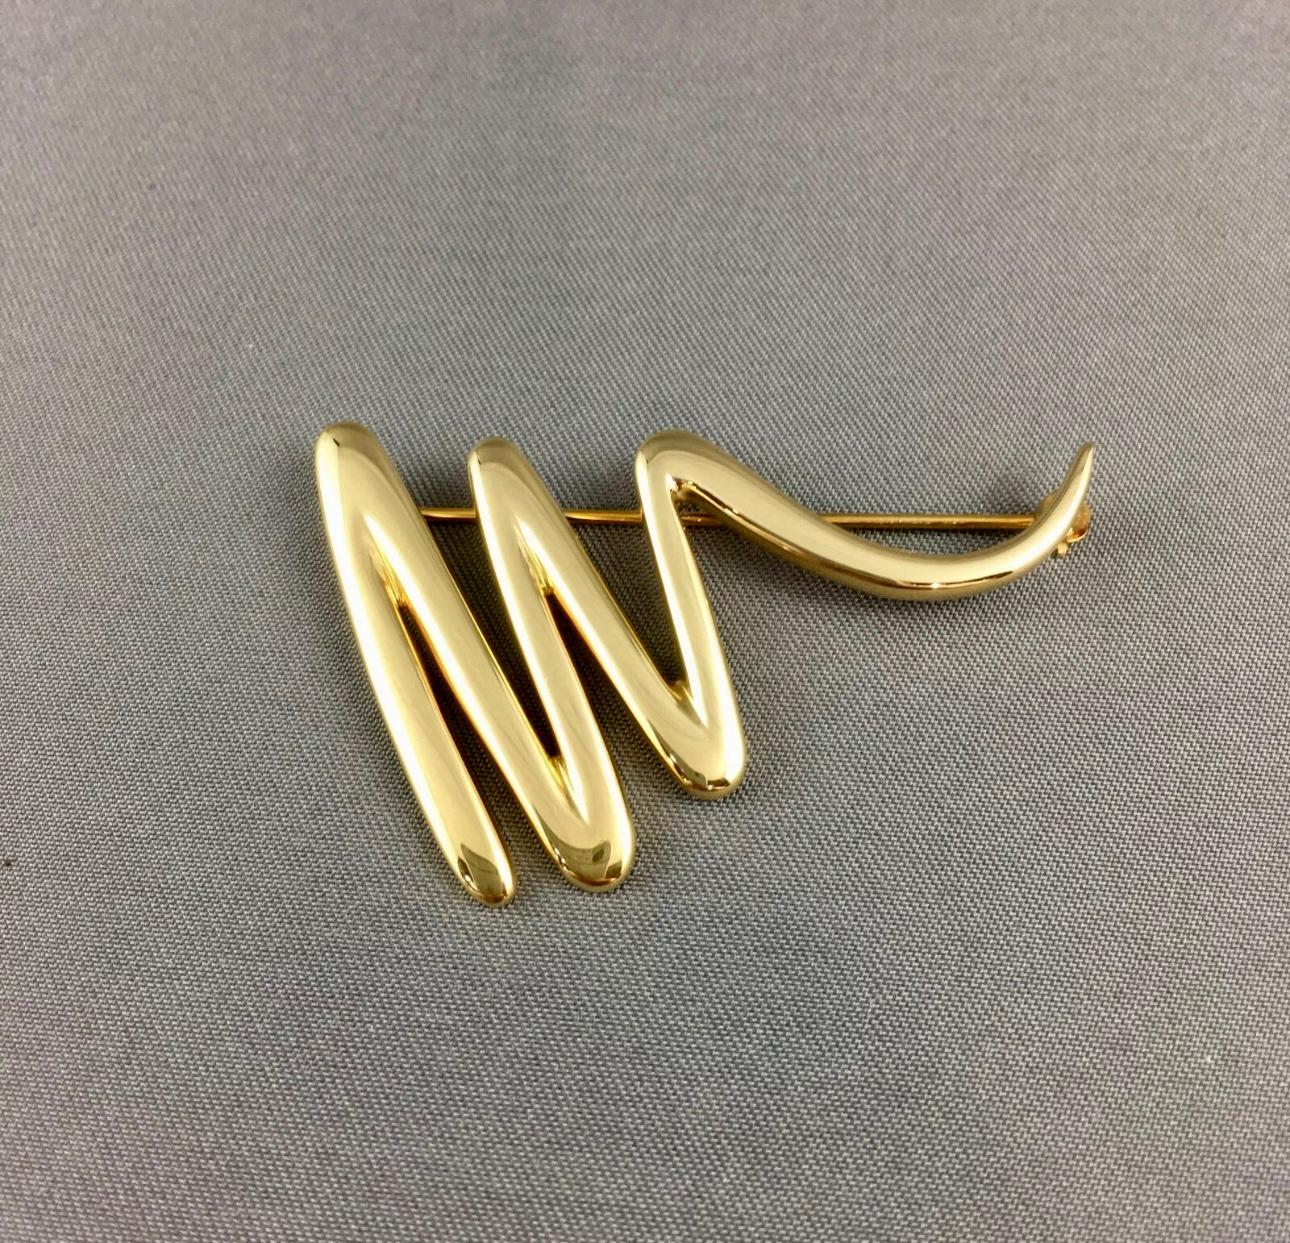 PALOMA PICASSO FOR TIFFANY & CO ZIG-ZAG SQUIGGLE PIN

Description / Condition: Mint. All jewelry has been professionally scrutinize
and cleaned prior to being offered for sale. 
Gender: Woman
Manufacturer: Tiffany & Co.
Model: Paloma Picasso Zig-Zag